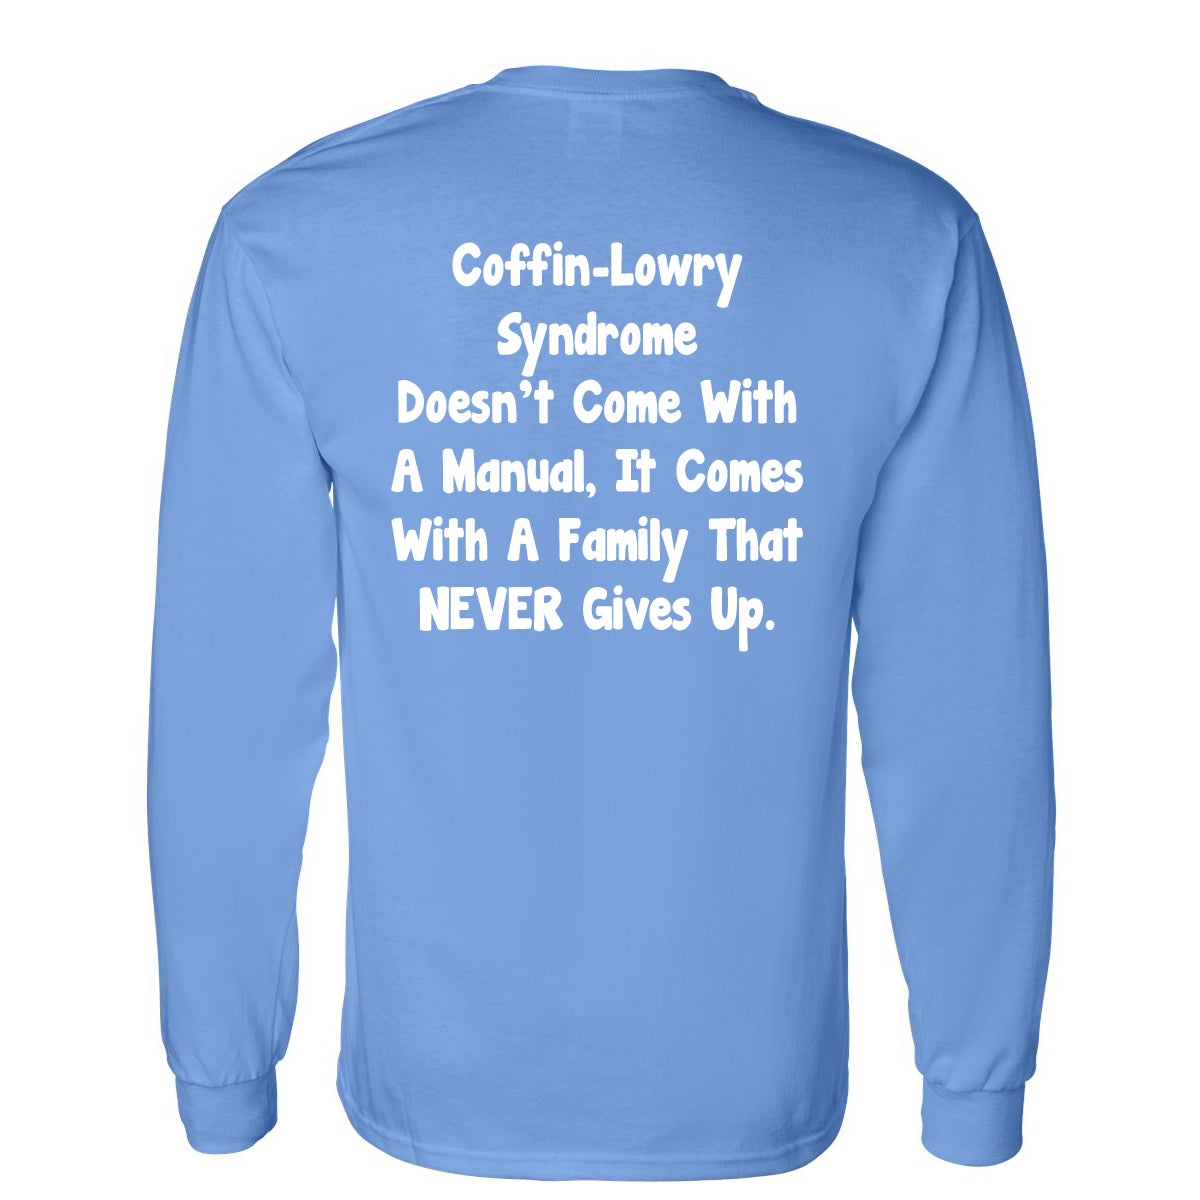 Coffin-Lowry Syndrome T-Shirts (ADULT LONG SLEEVE)